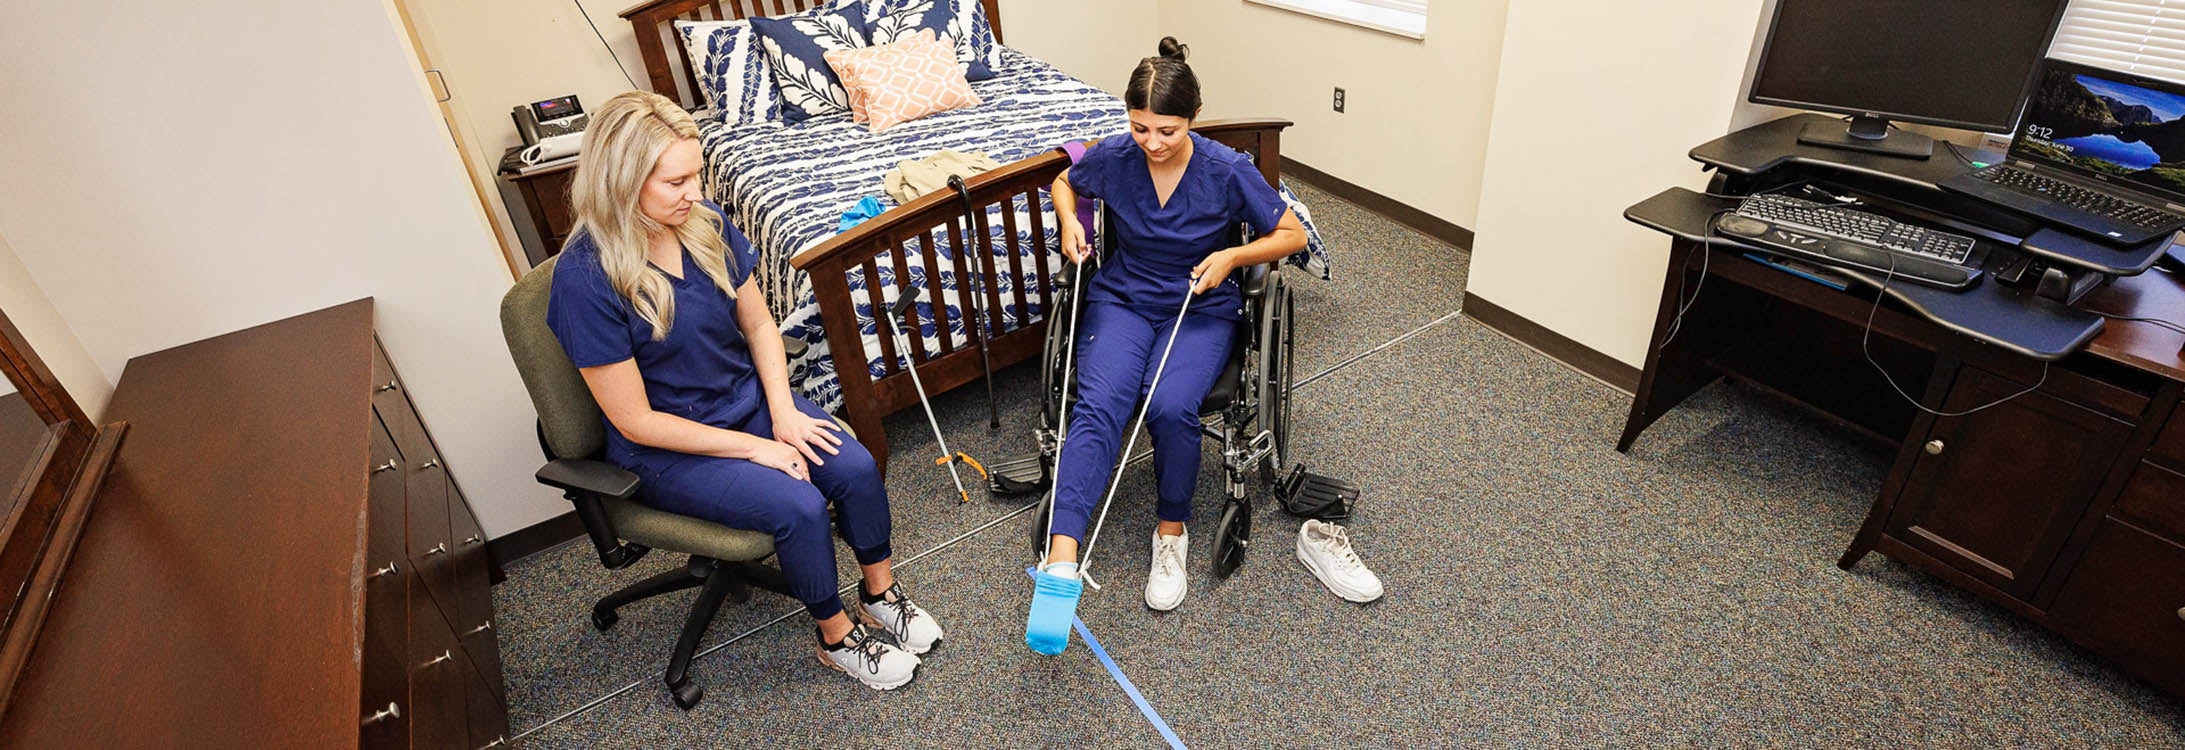 ECU occupational therapy students practice guiding patients through life tasks in the College of Allied Health’s simulated apartment, where students use hands-on approaches to learn occupational therapy skills.